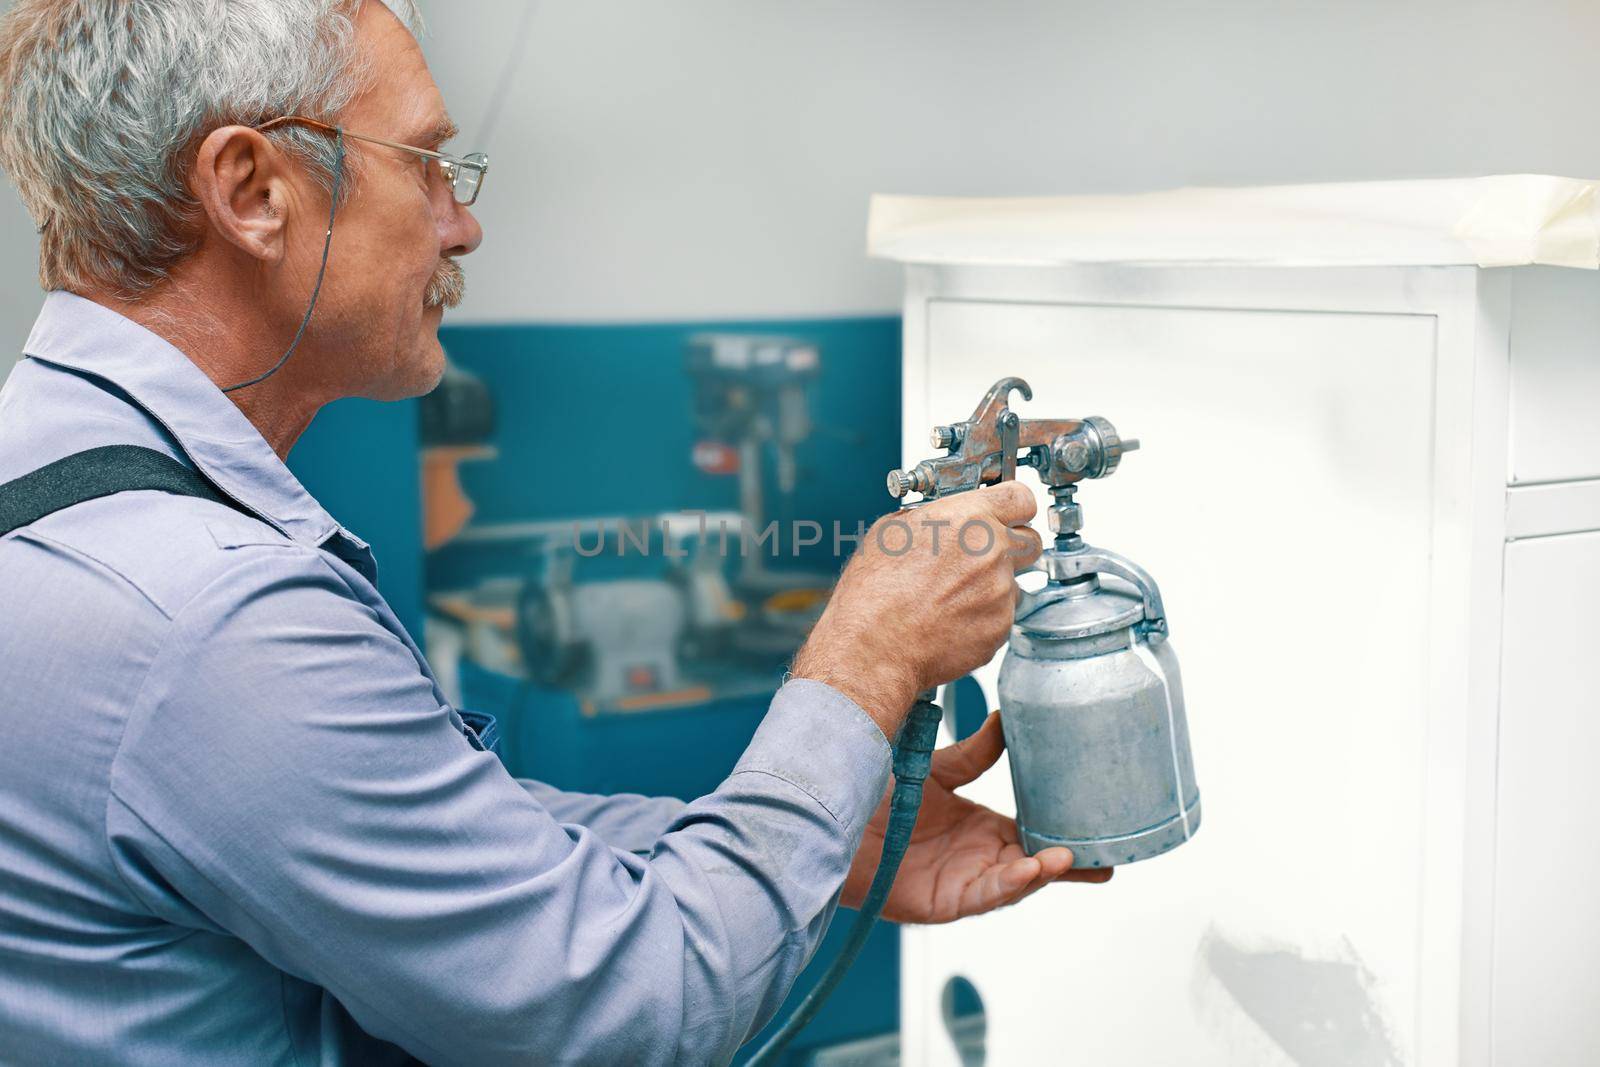 An employee paints metal products. An elderly man holds a compressor spray gun in his hand and paints the Cabinet white